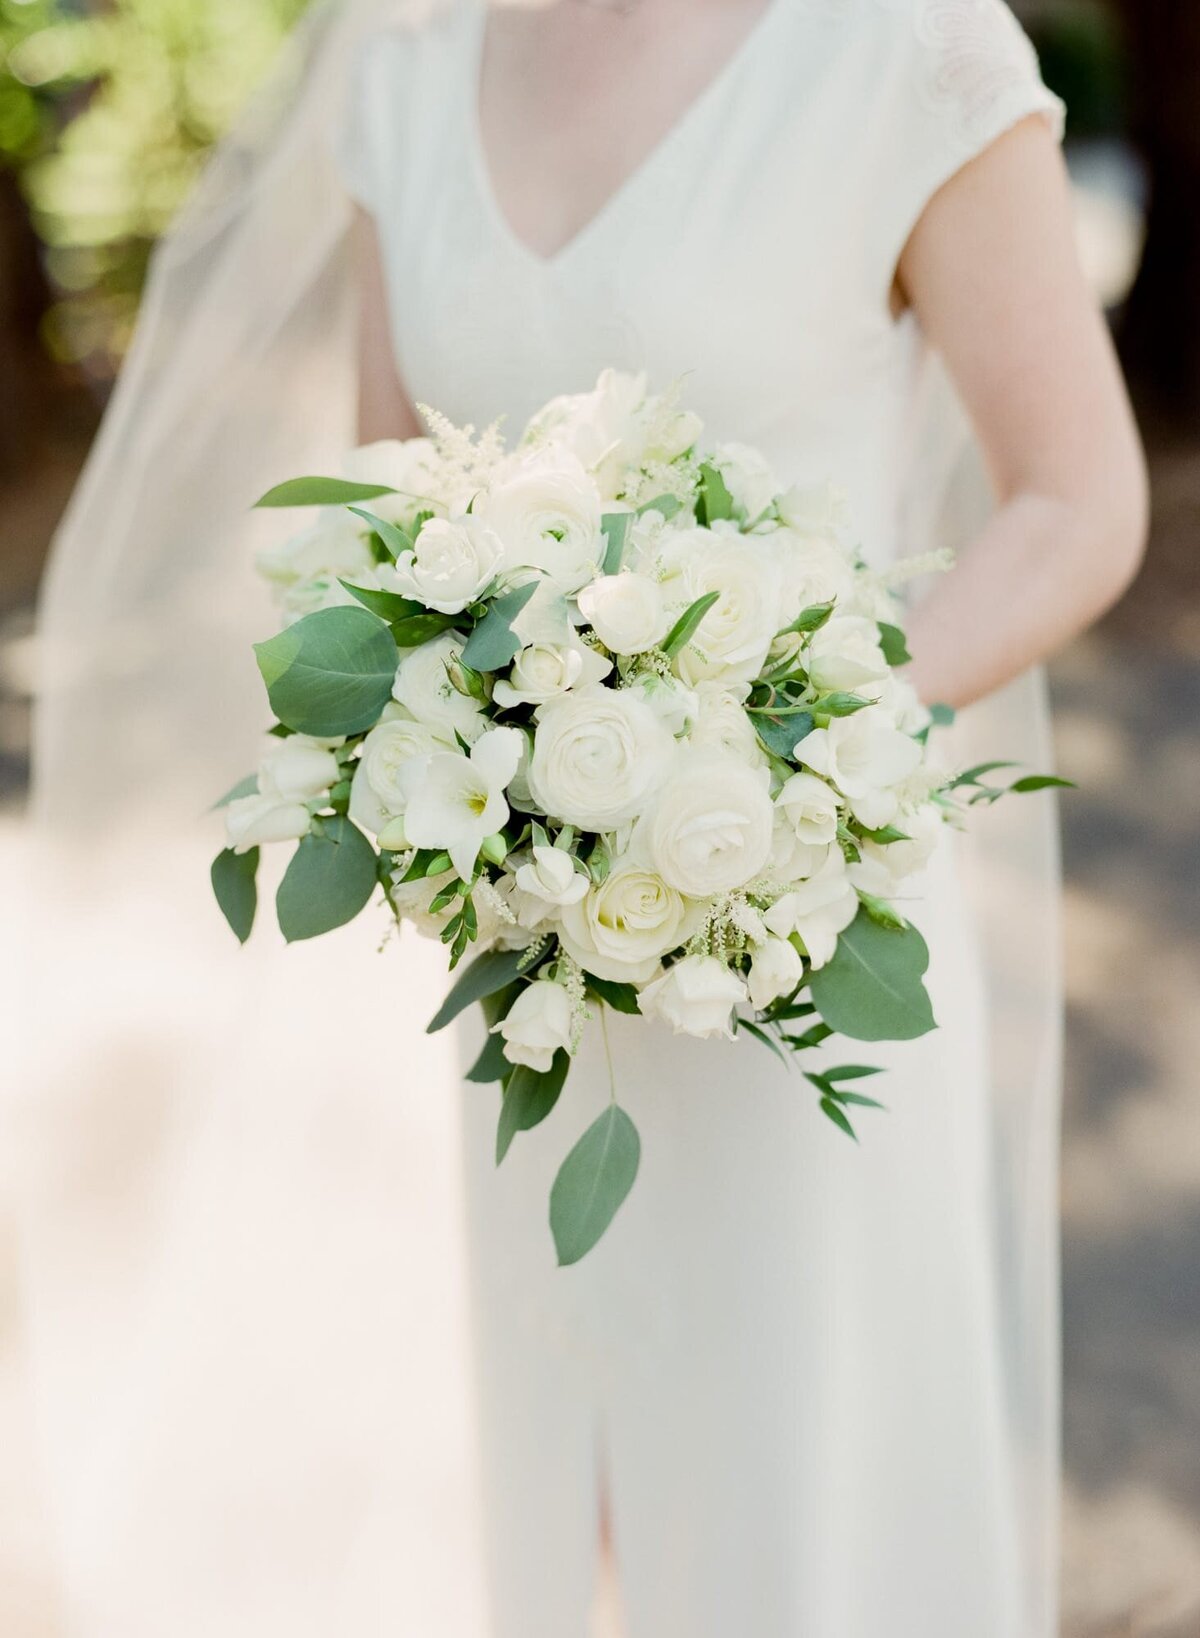 Spouse-to-be dressed in a white wedding dress holding a beautiful bouquet of white roses.